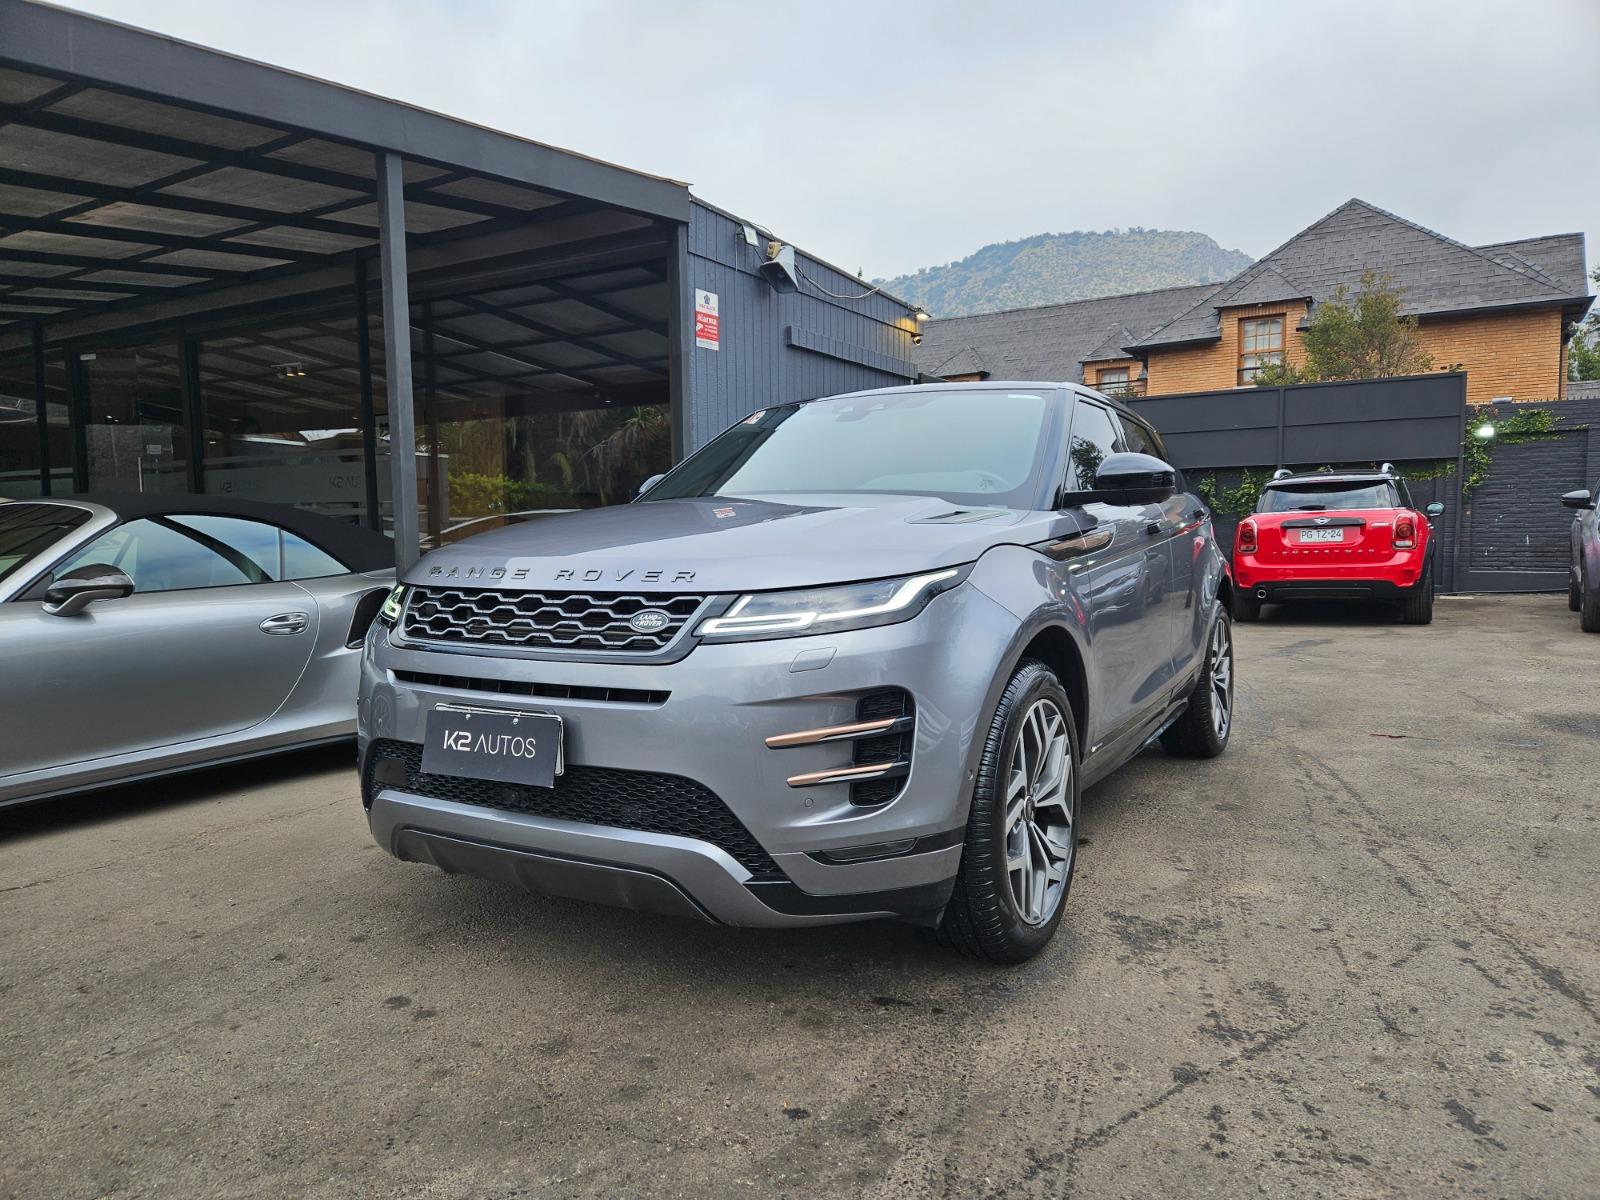 LAND ROVER RANGE ROVER EVOQUE R-DYNAMIC HSE P250 2020 FULL EQUIPO, IMPECABLE - 